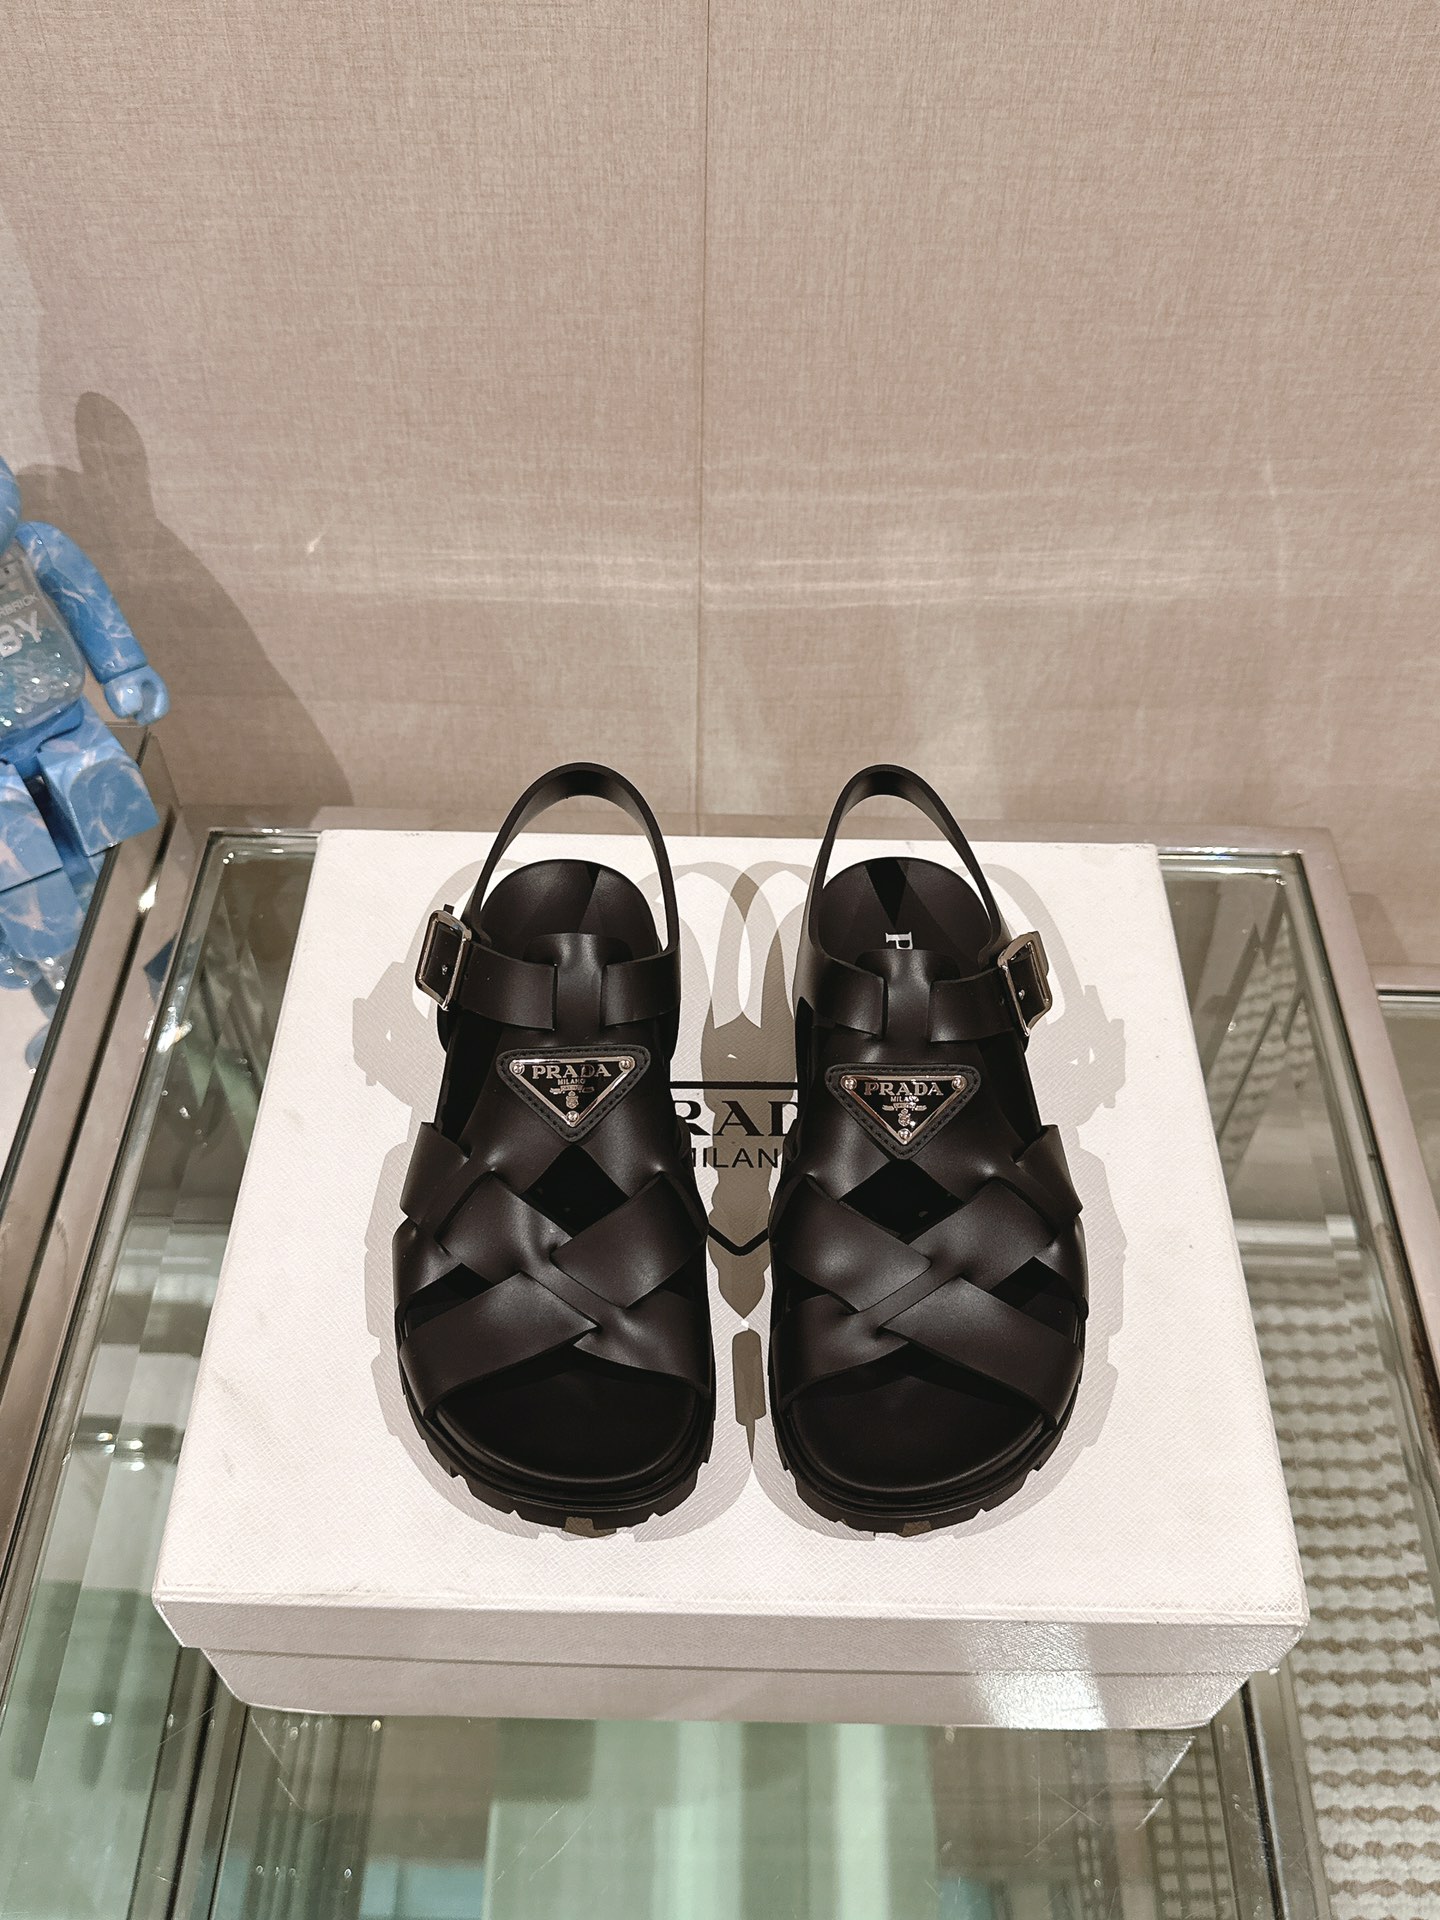 Prada Shoes Sandals Unsurpassed Quality
 Rubber Sheepskin Spring/Summer Collection Vintage Beach